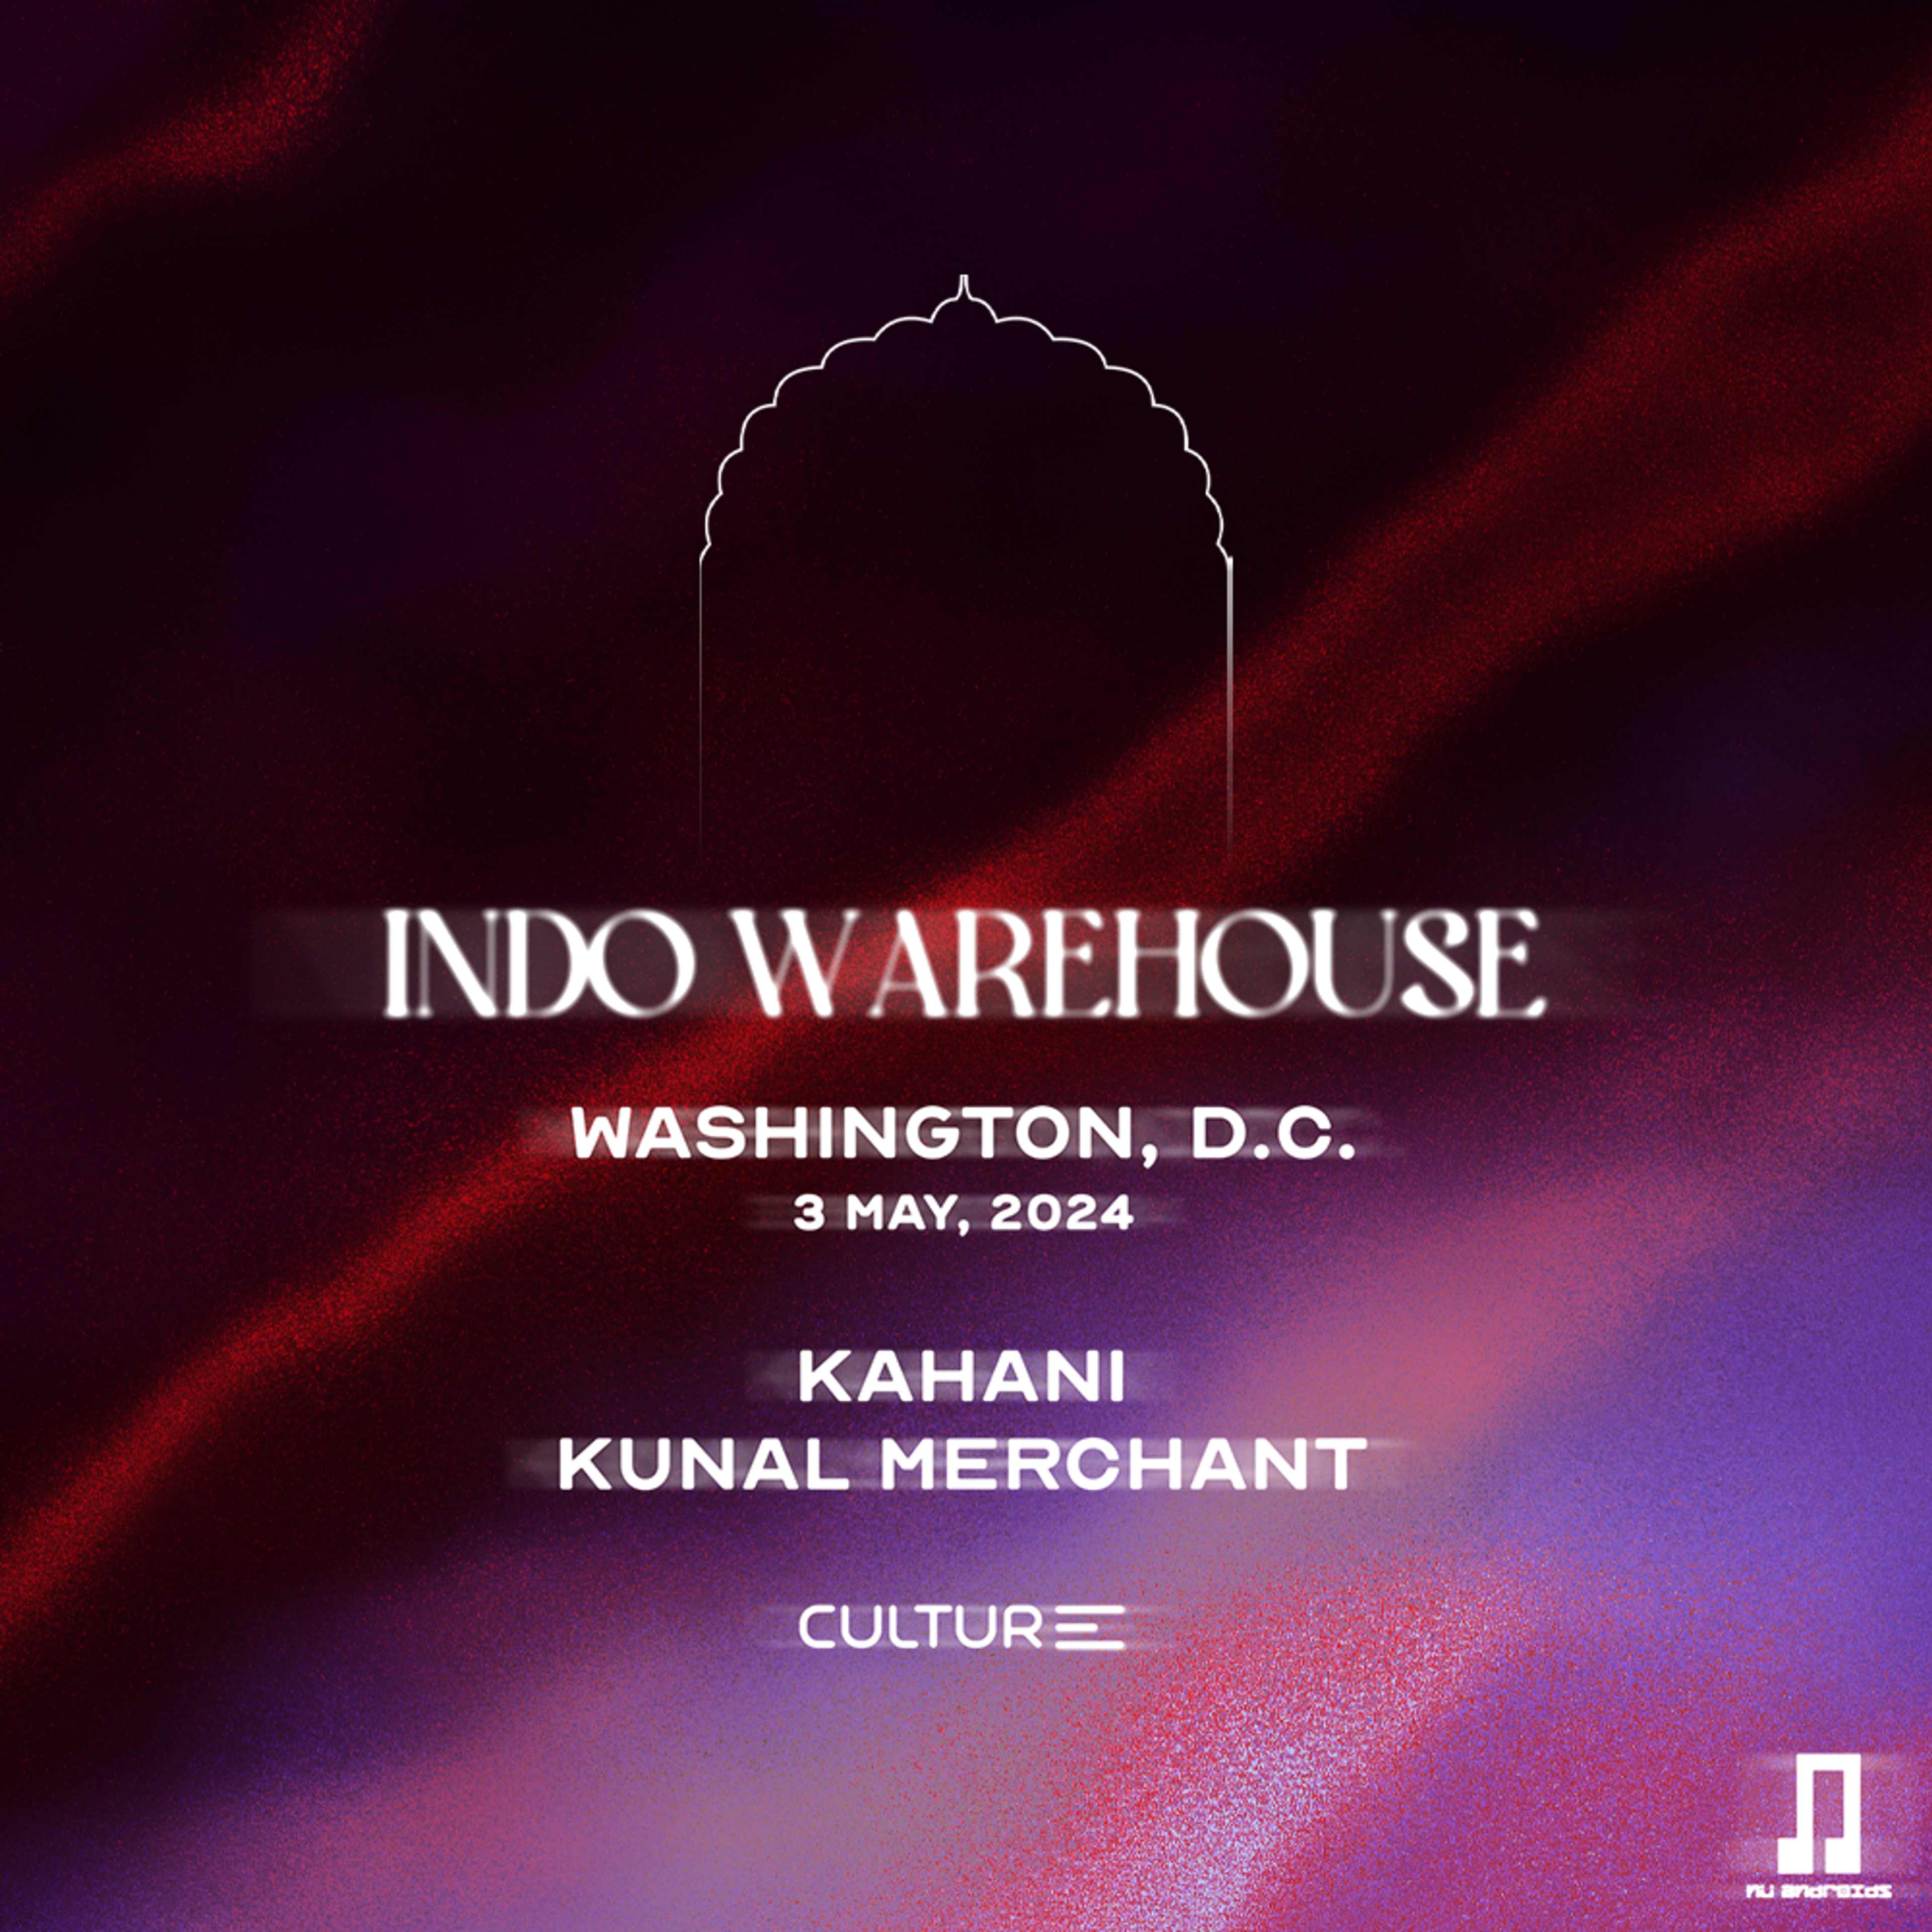 Flyer image for Indo Warehouse